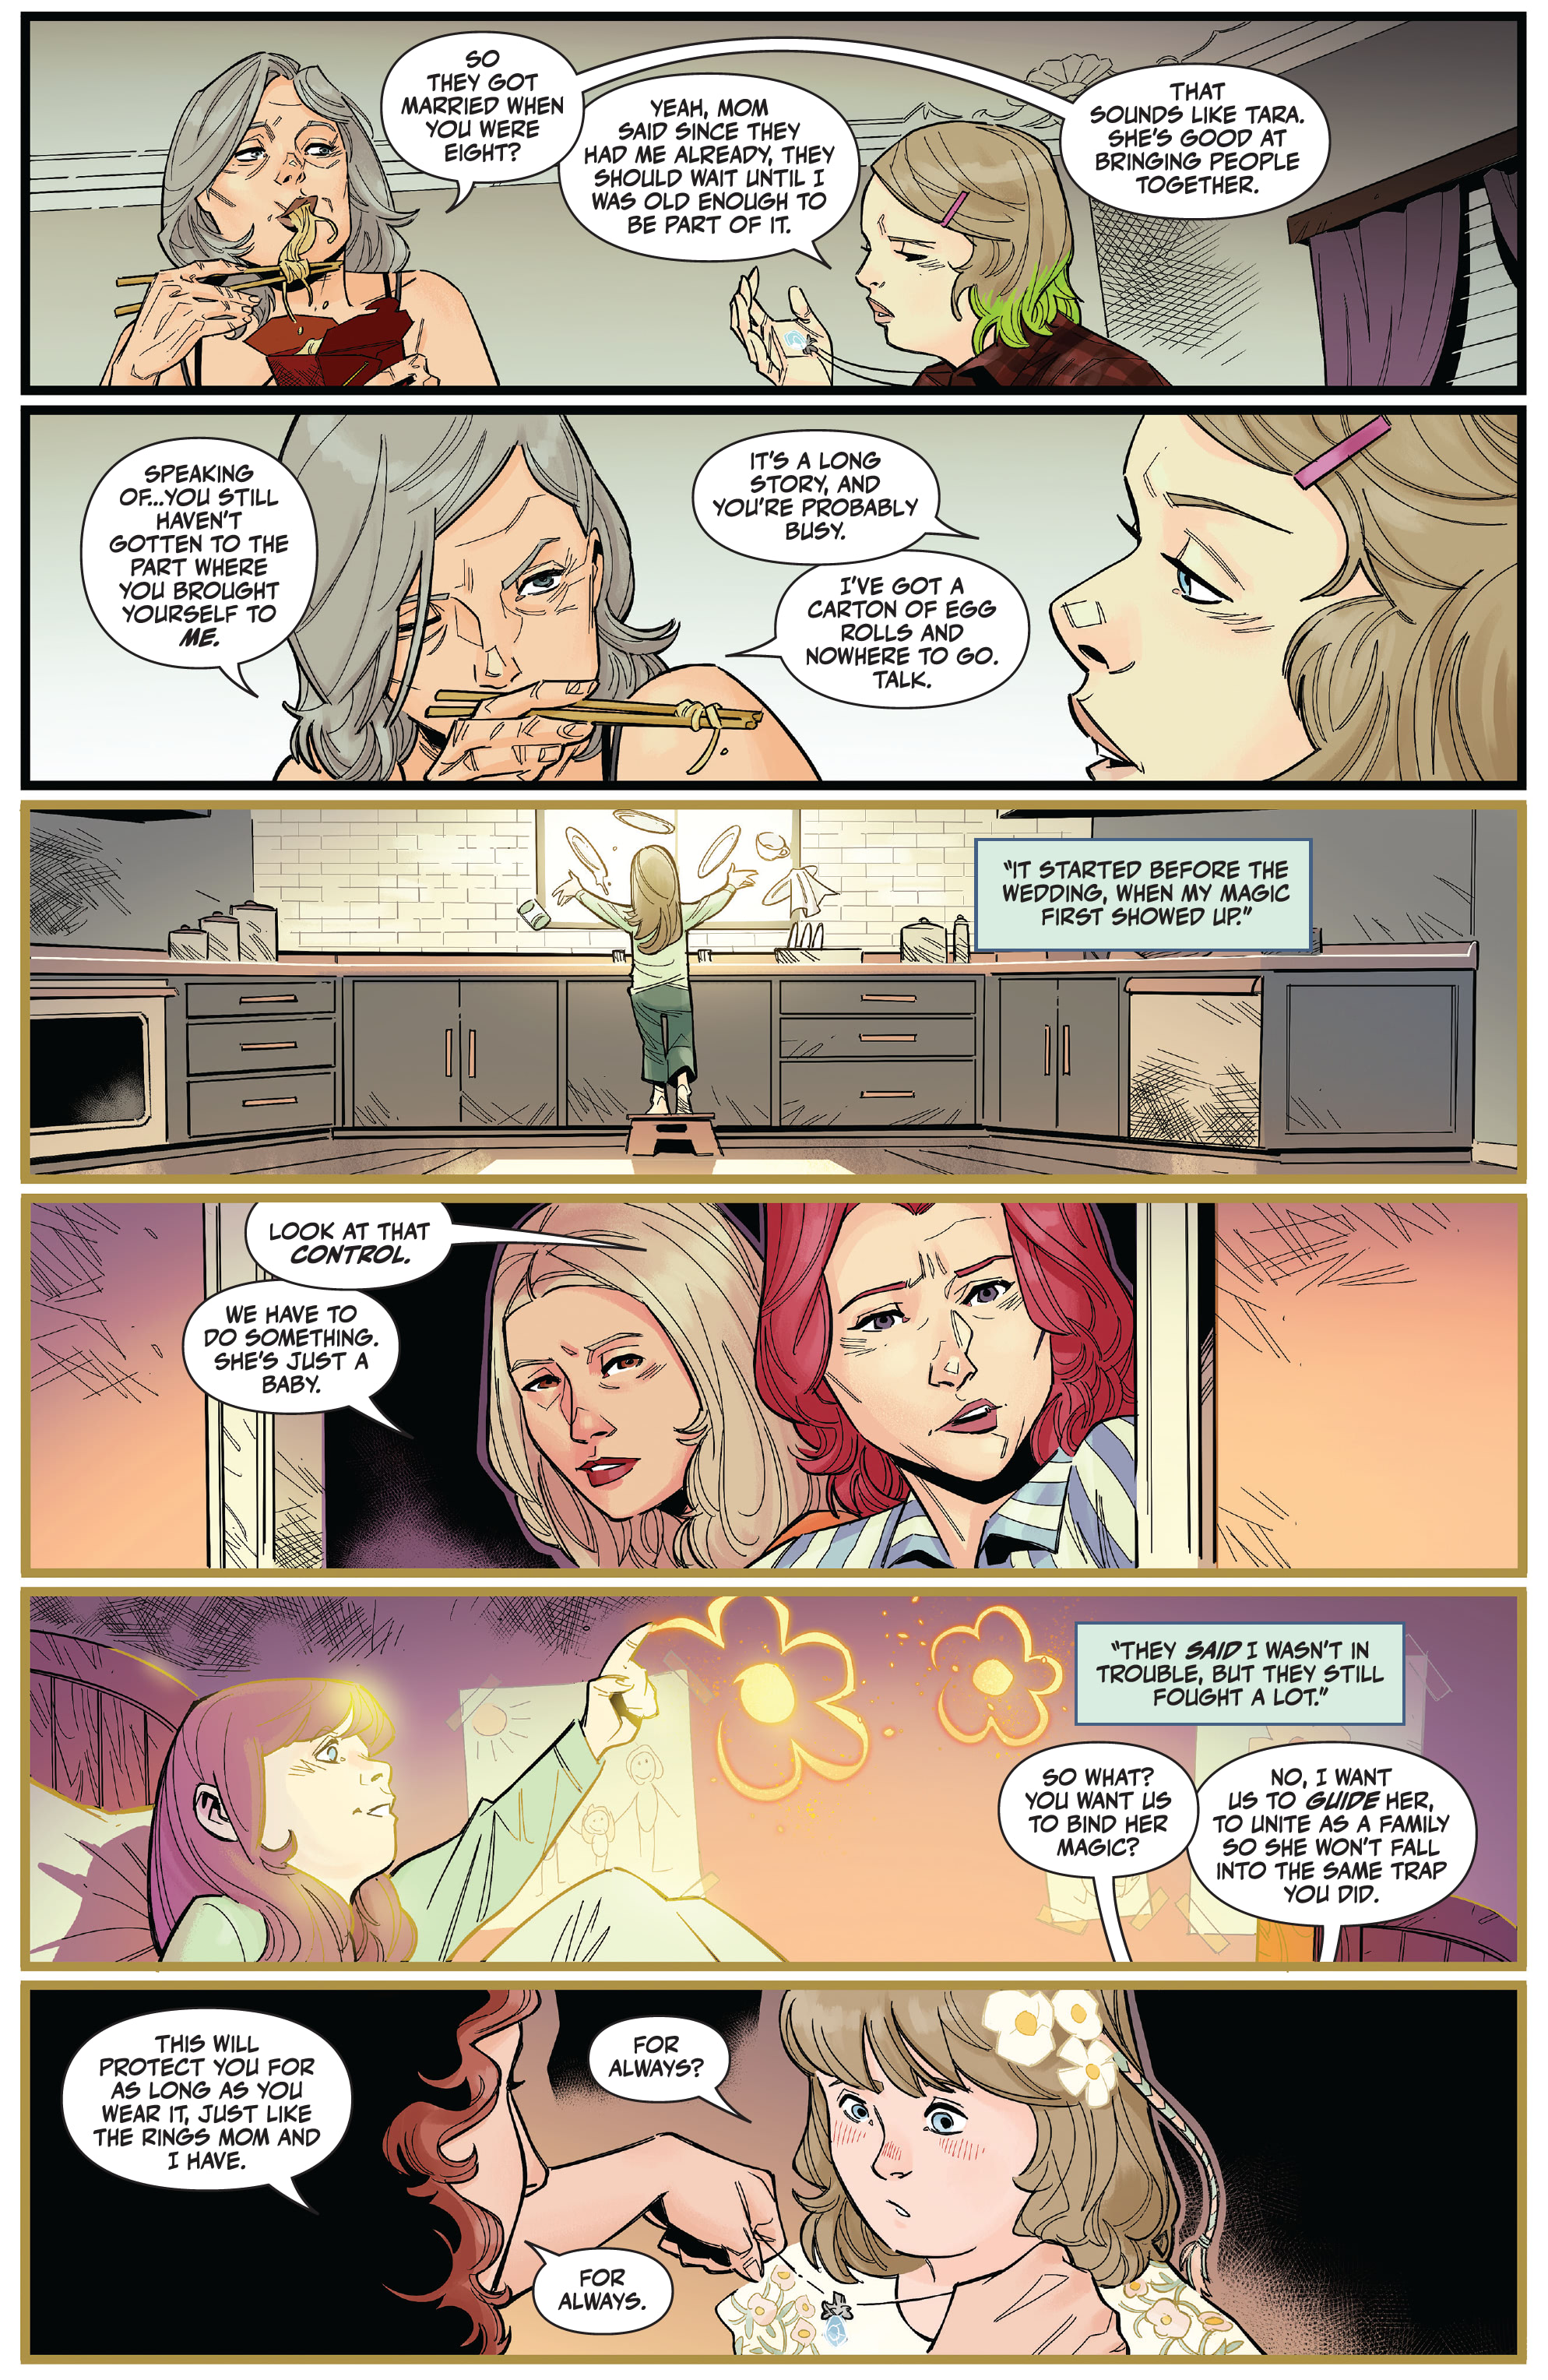 Buffy the Last Vampire Slayer (2021-): Chapter 2 - Page 4